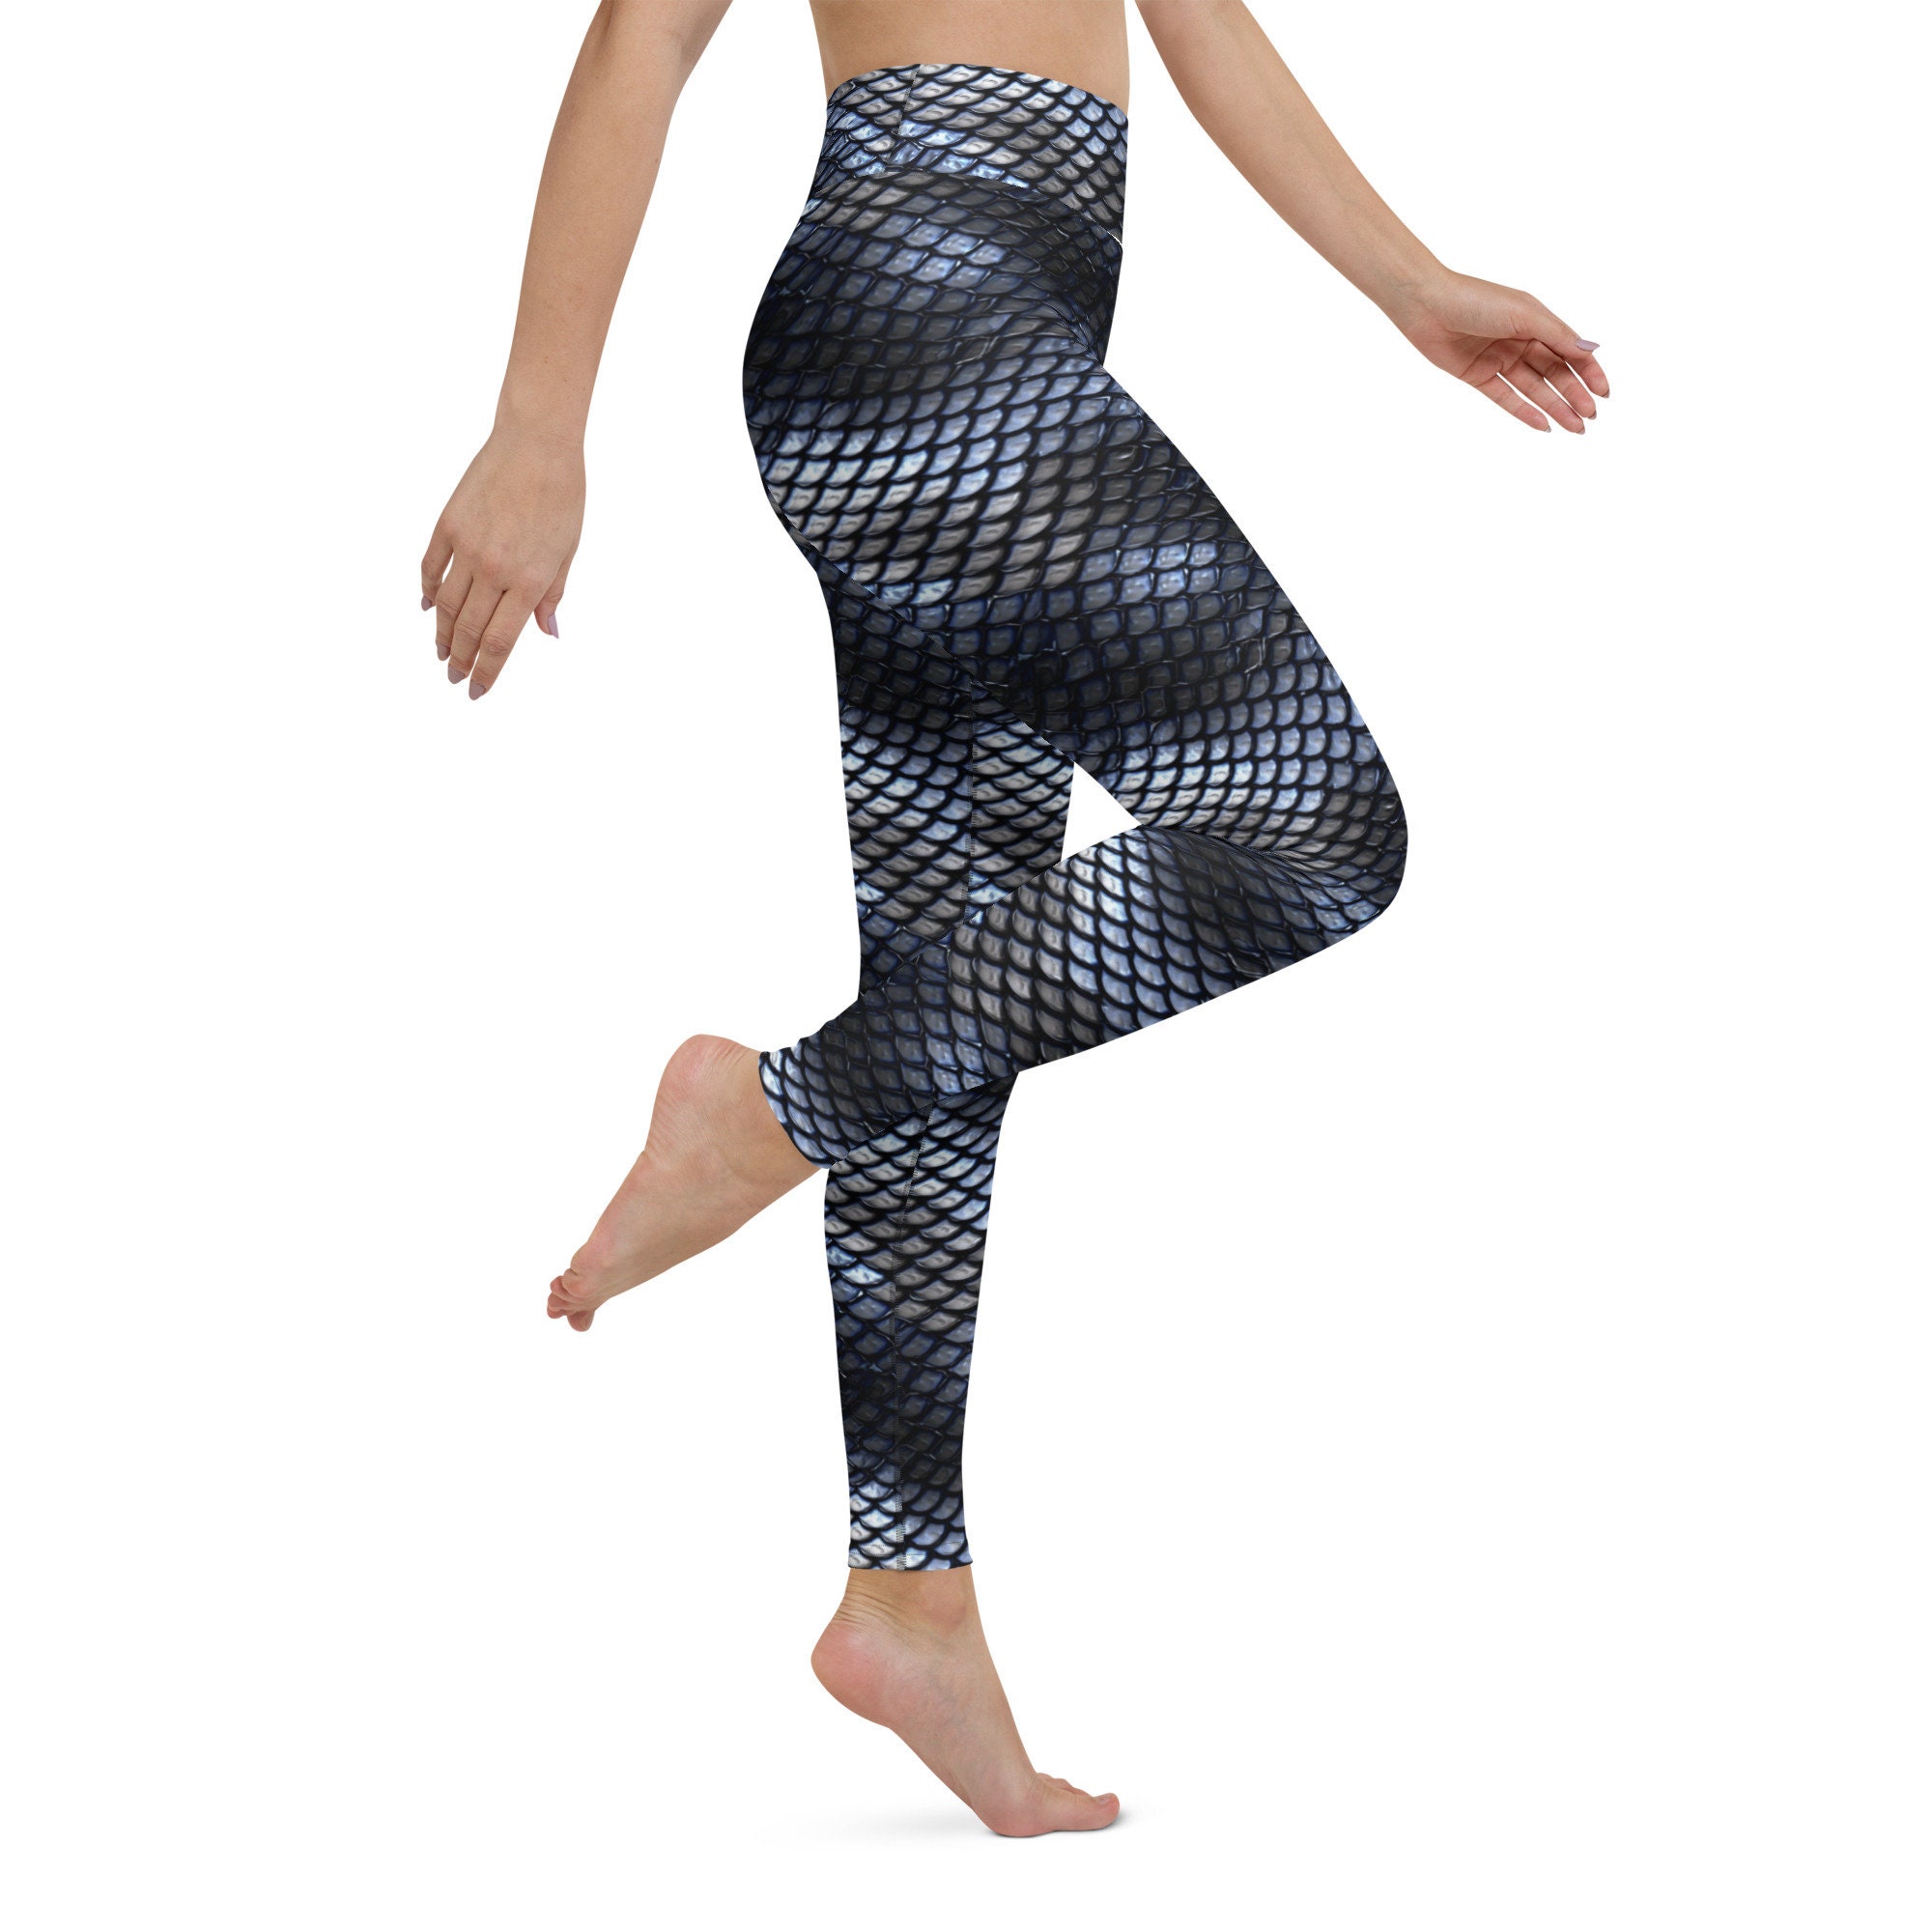 Carbon Fiber Plus Size Leggings for Women High Waisted Pants W/ High  Performance Print Non See Through Perfect for Yoga, Running and Workout 